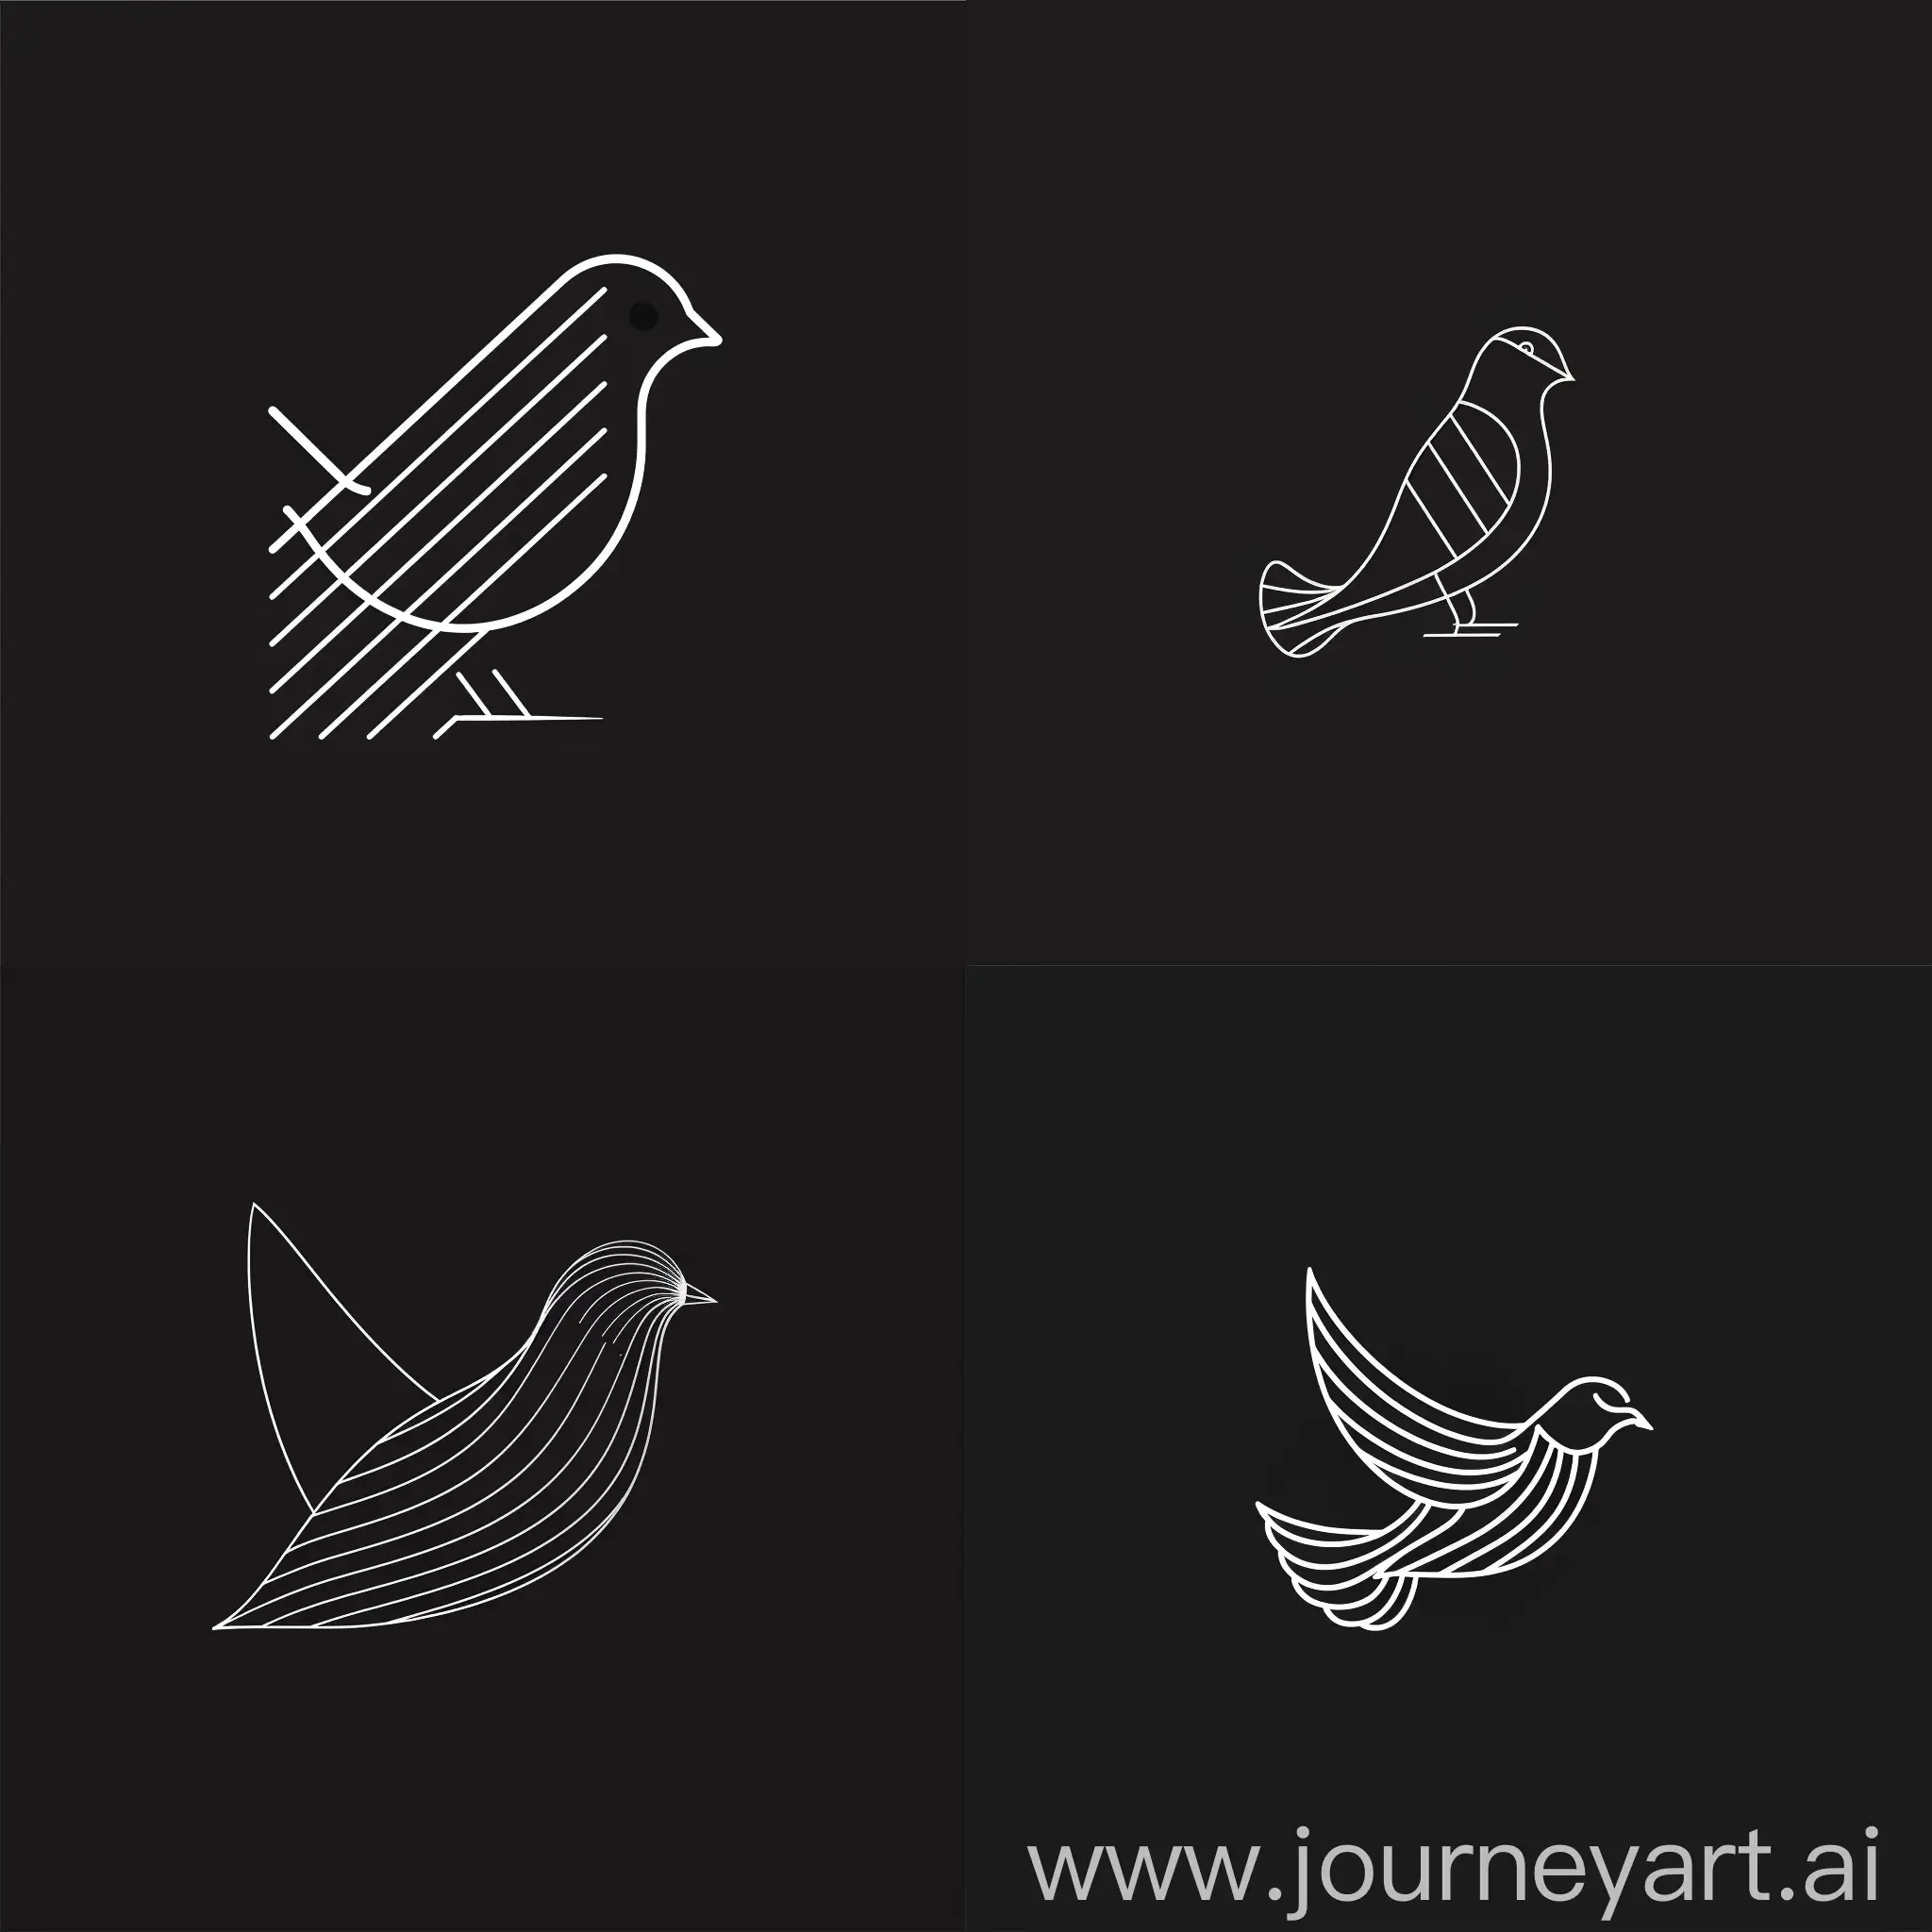 a minimalist logo of a pigeon formed by lines, simple, clean, monochromatic, vector graphics, modern design, geometric shapes, sleek, logo design, abstract, iconic, 2D illustration